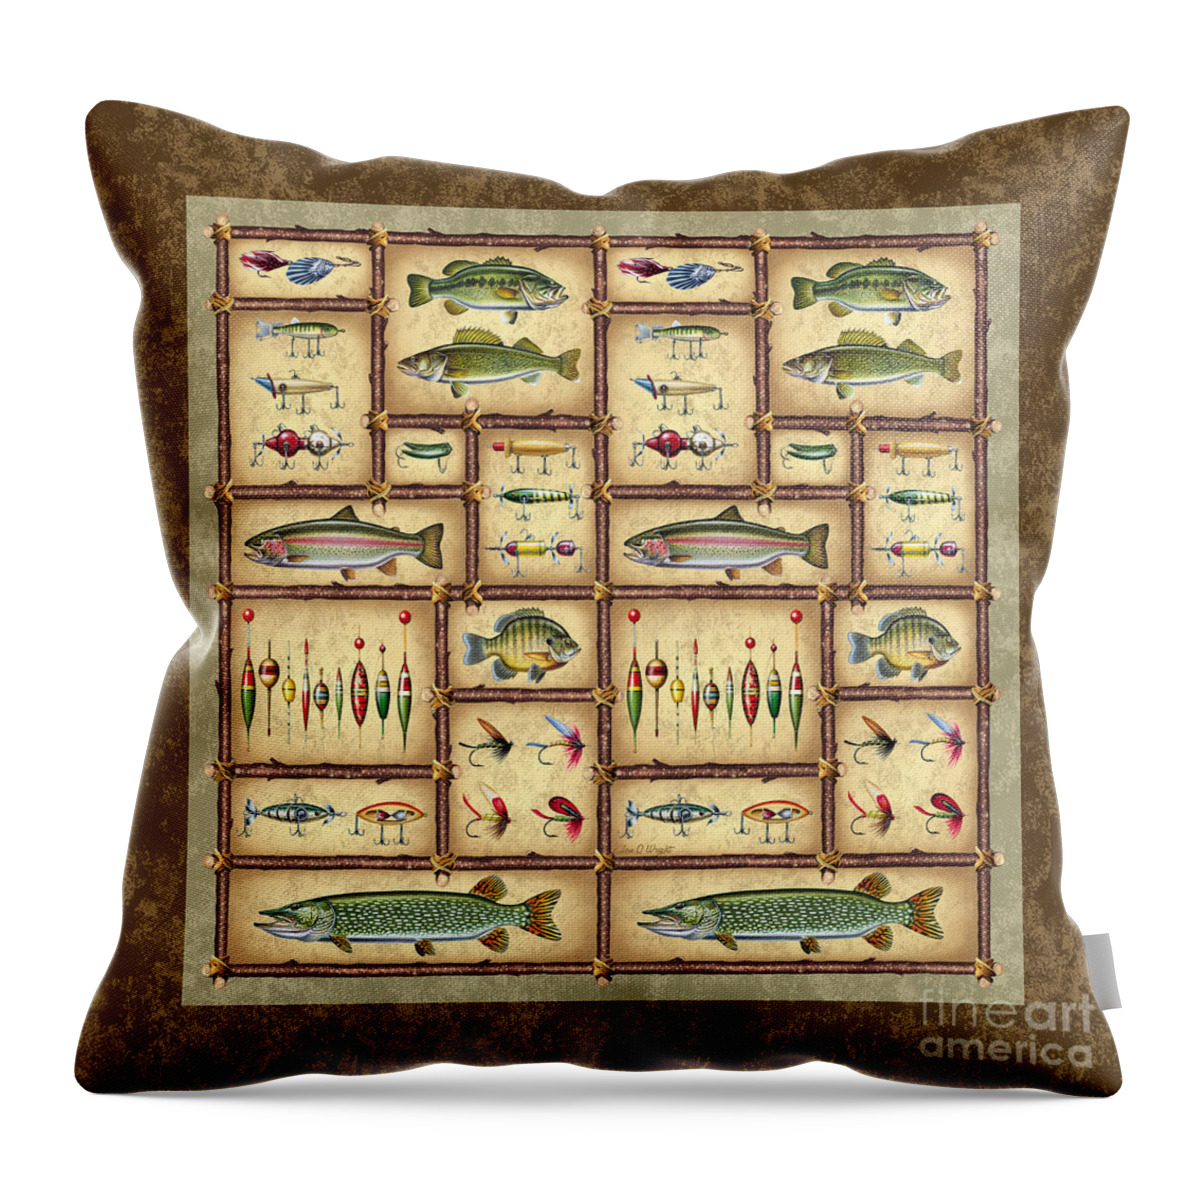 Bedding Throw Pillow featuring the painting Fish Sticks Square Pillow by JQ Licensing